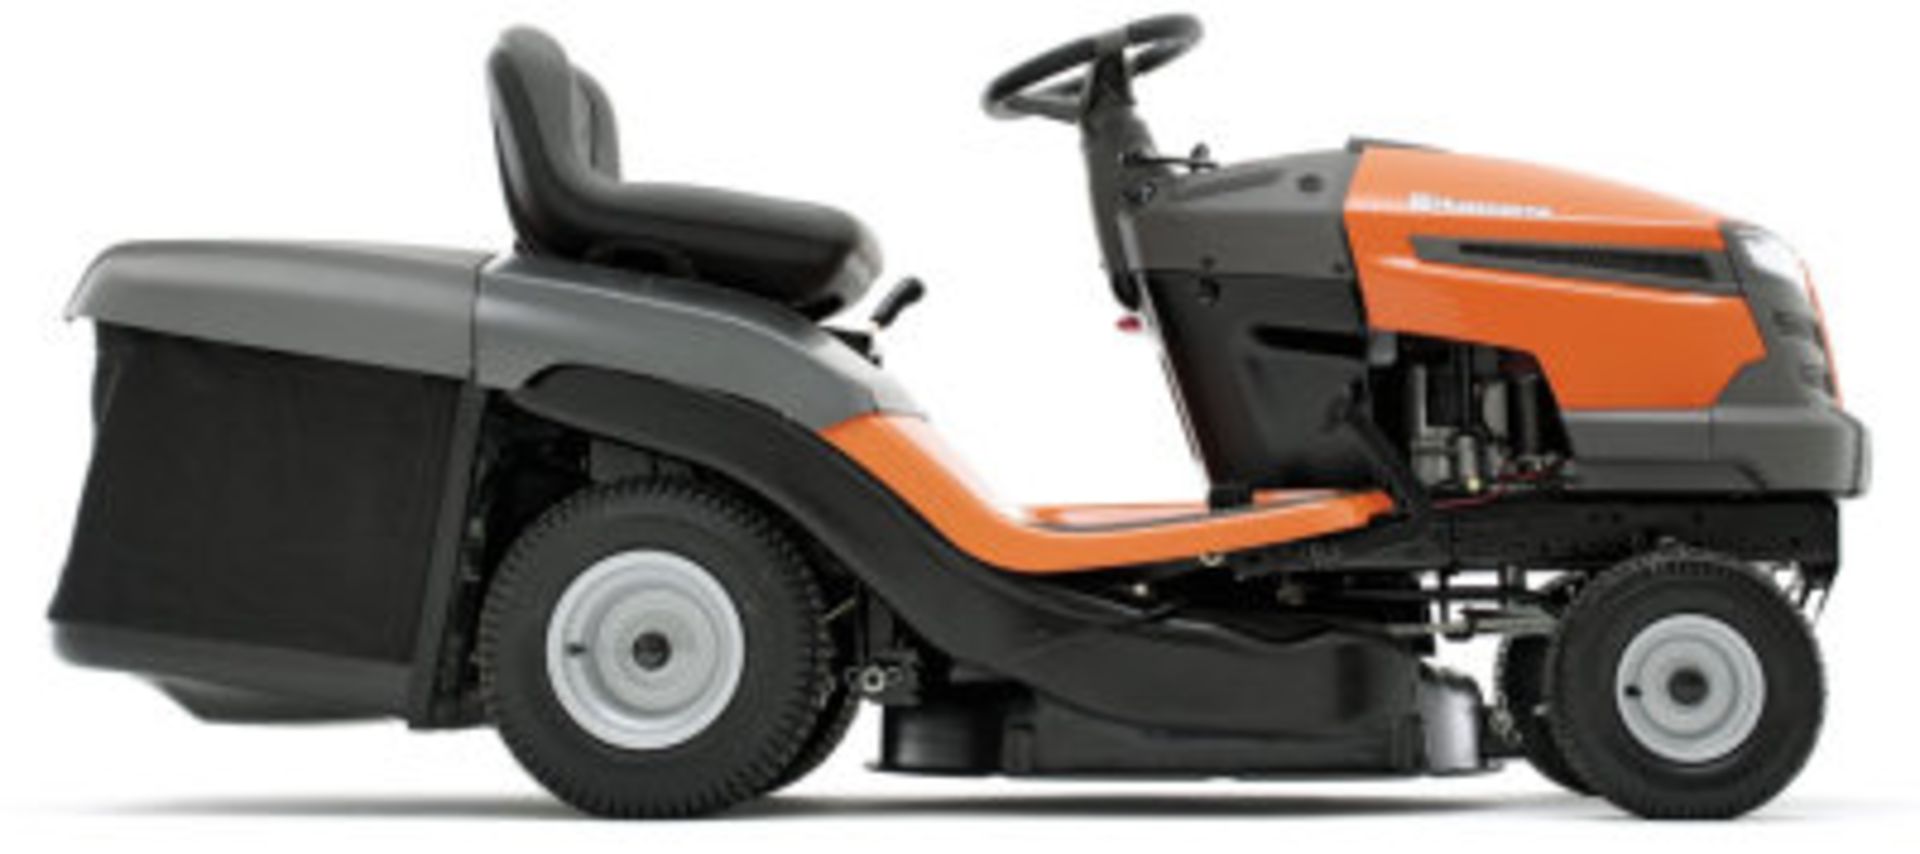 2020 BRAND NEW HUSQVARNA TC130 ROTARY RIDE ON LAWN MOWER (REAR DISCHARGE) C/W COLLECTOR *PLUS VAT* - Image 2 of 3